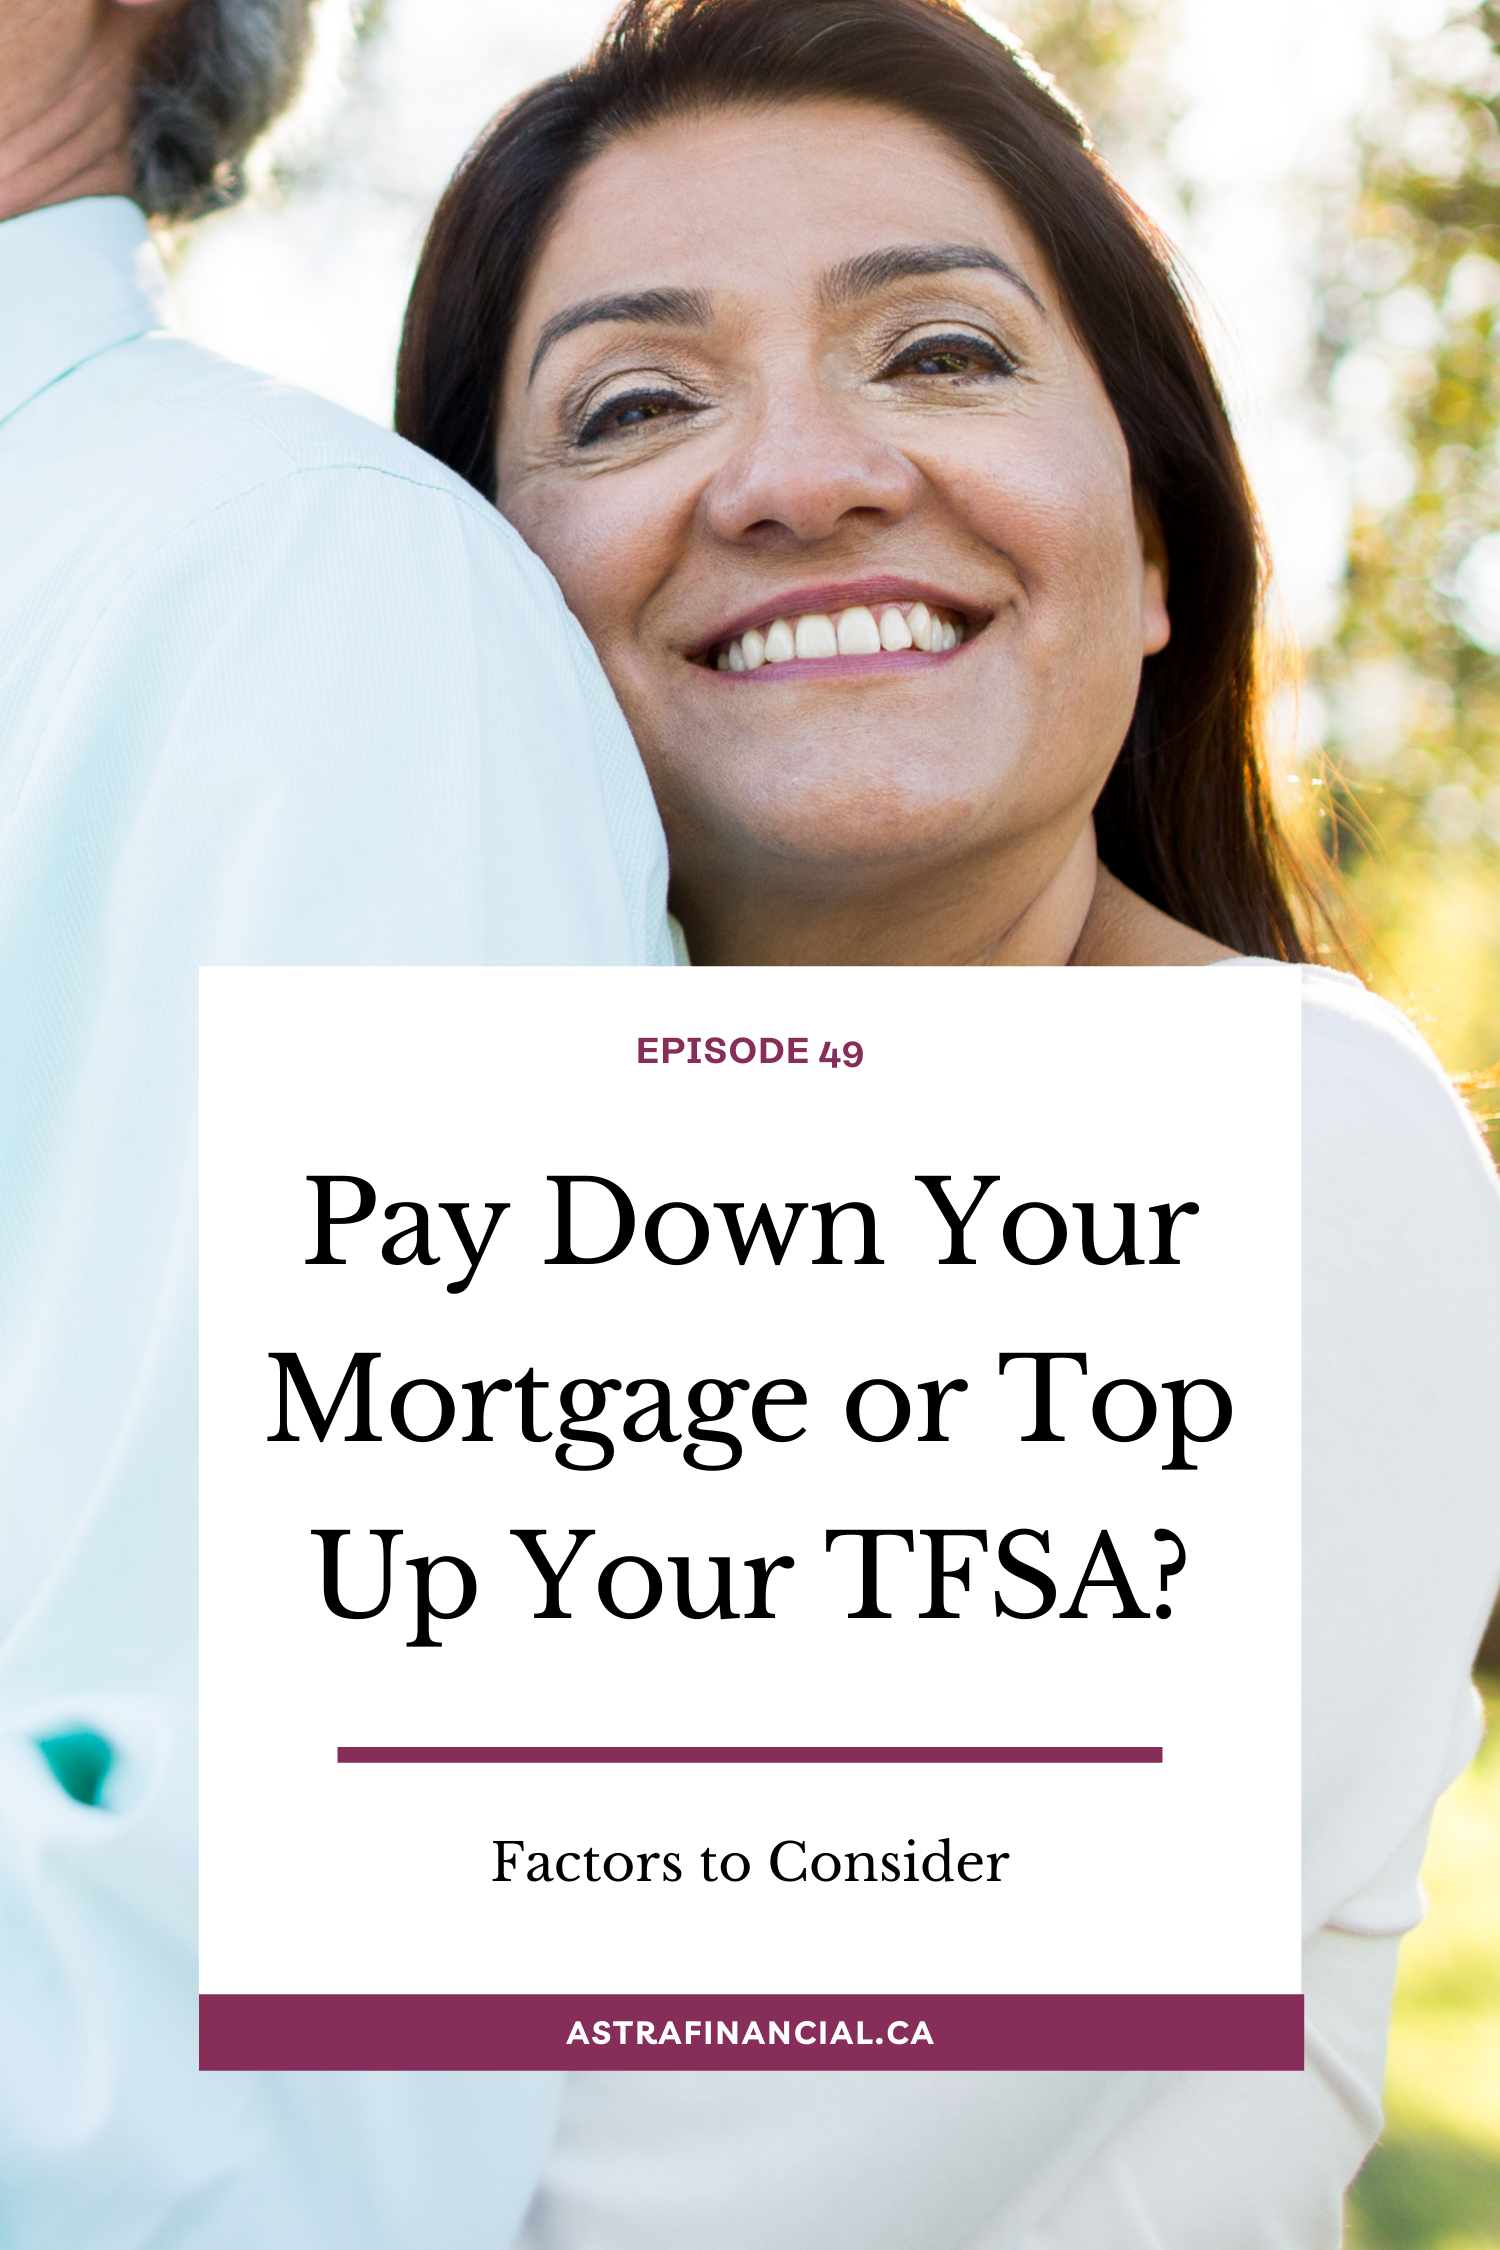 Episode 49 - Pay Down Your Mortgage or Top Up Your TFSA? by Astra Financial